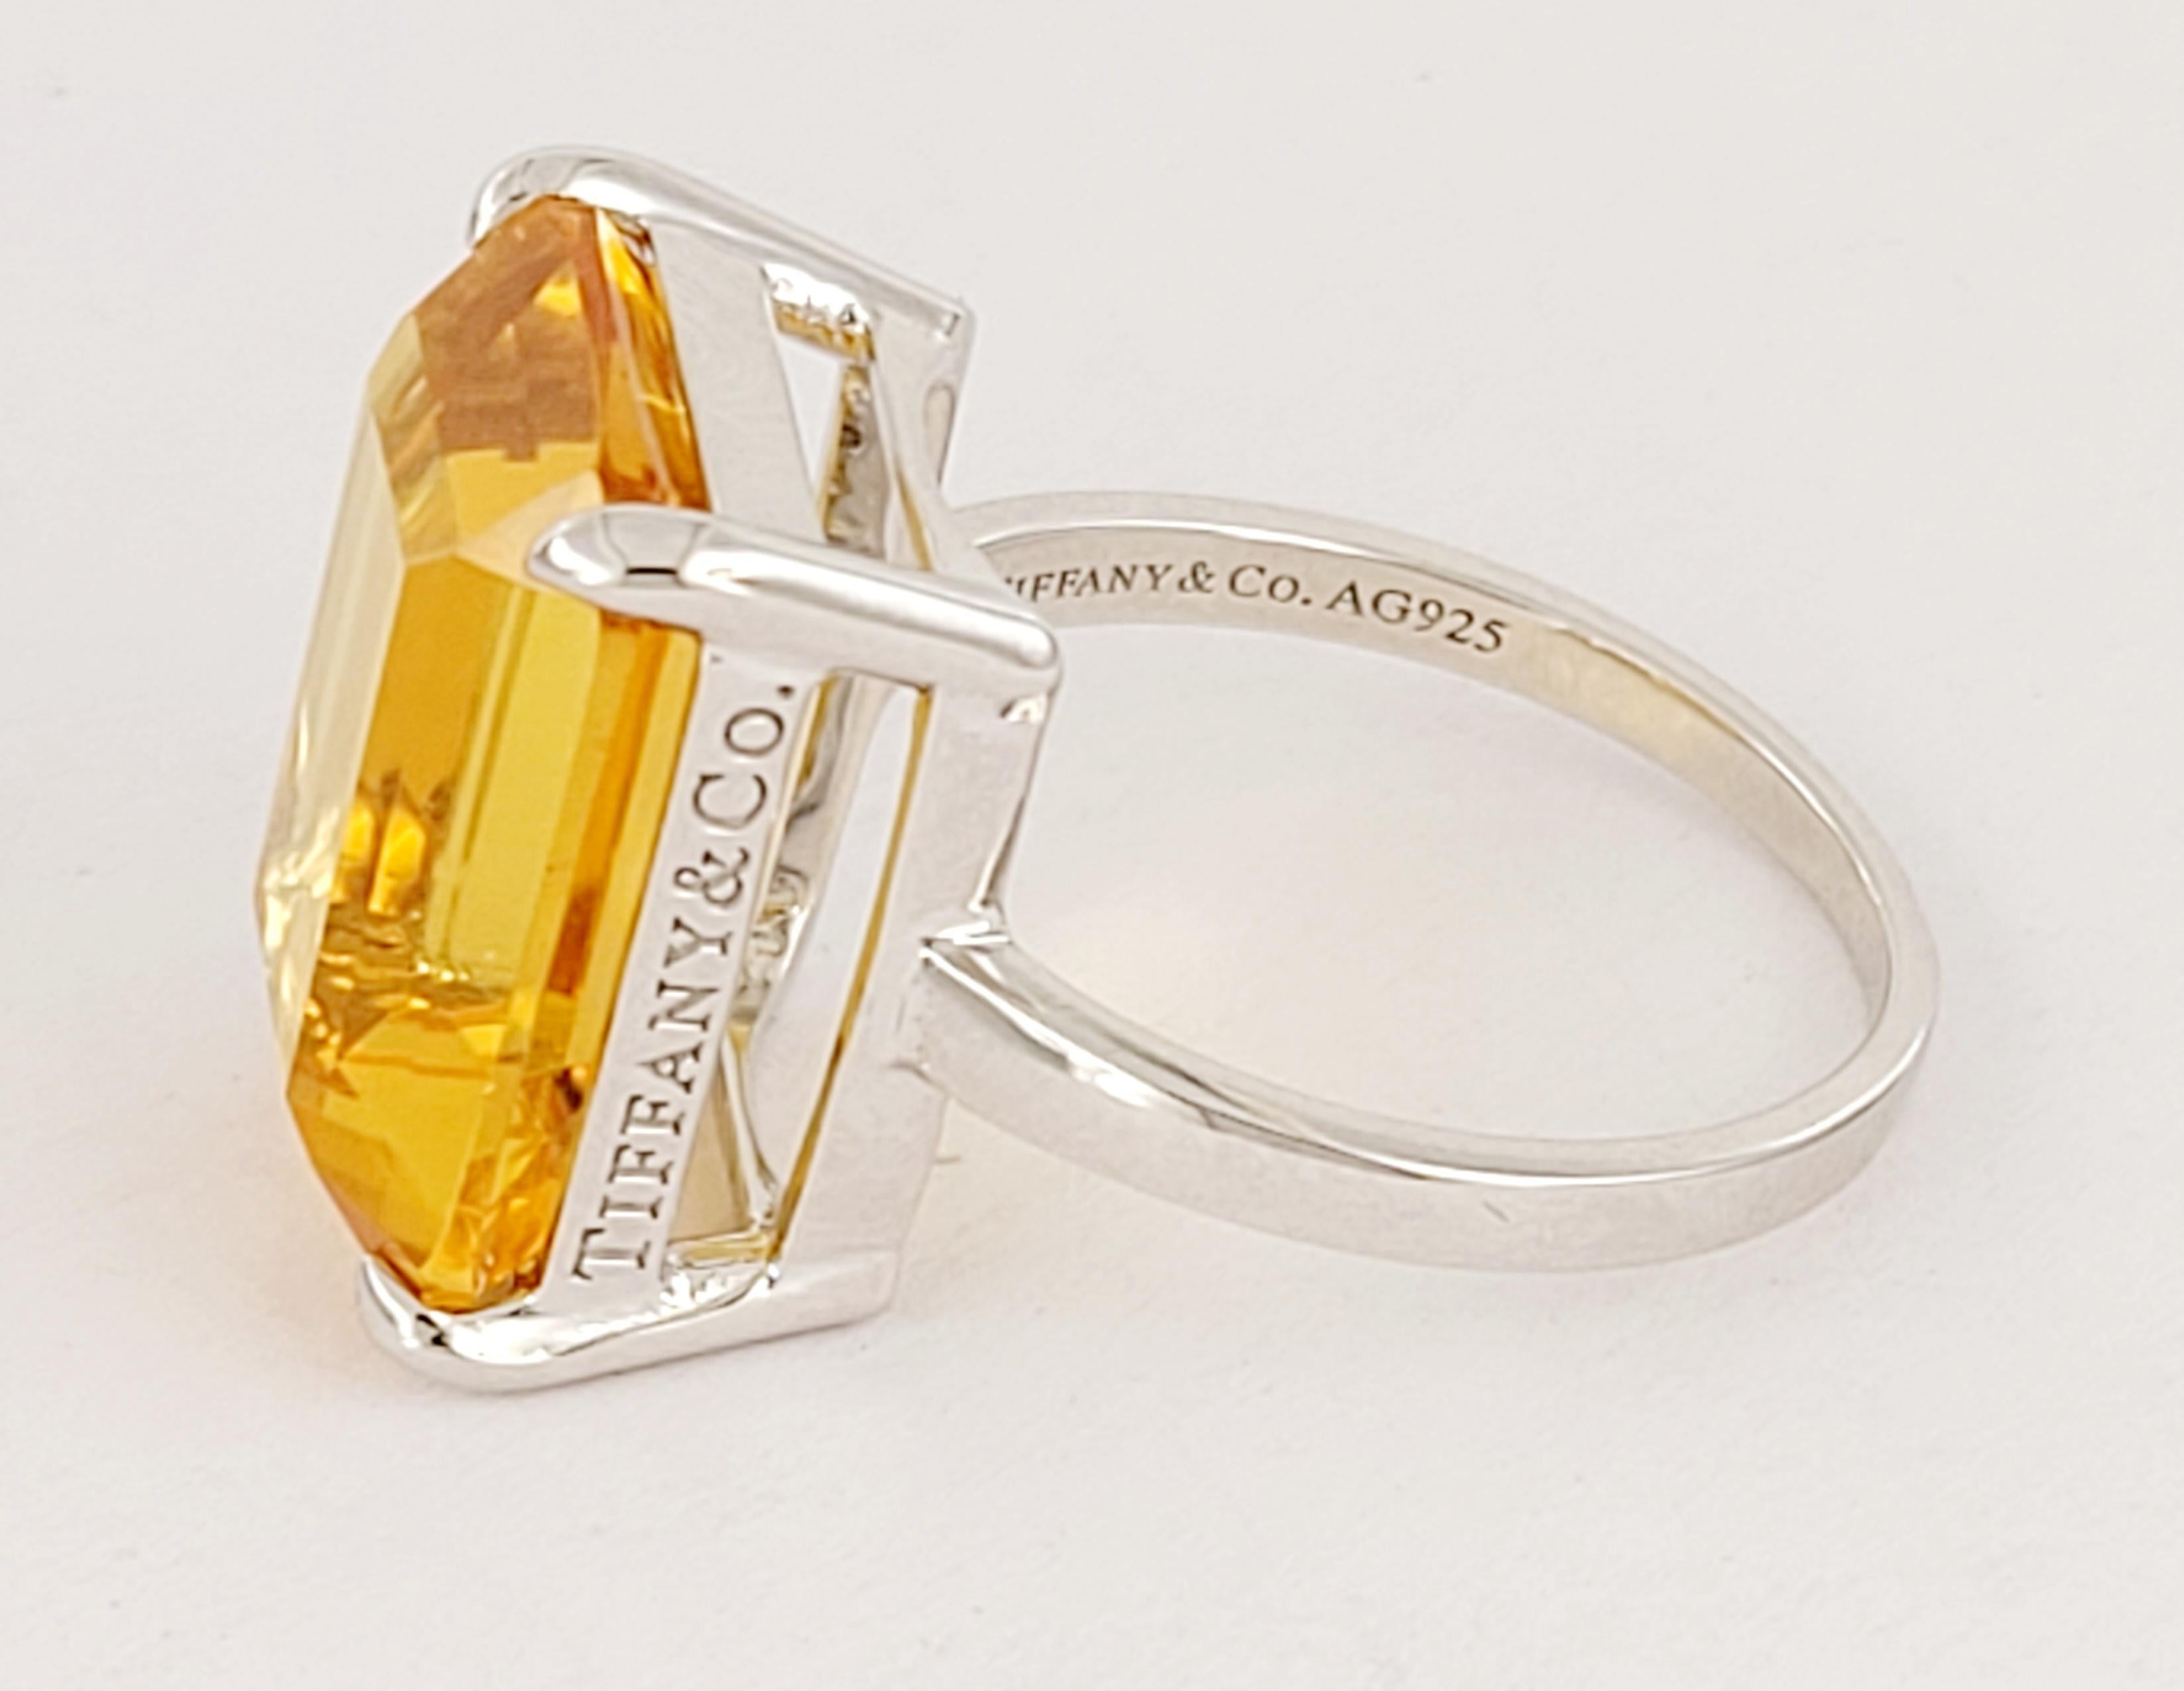 Tiffany& Co Sparklers Citrine Ring

Emerald Cut Citrine 

Stone Color Orange Citrine

Citrine Dimension 16 X 12mm

Ring Size 6

Ring Weight 3.3gr 

Hallmarks: Tiffany & Co. AG925

Condition New, never worn 

Comes with Tiffany &Co Pouch 